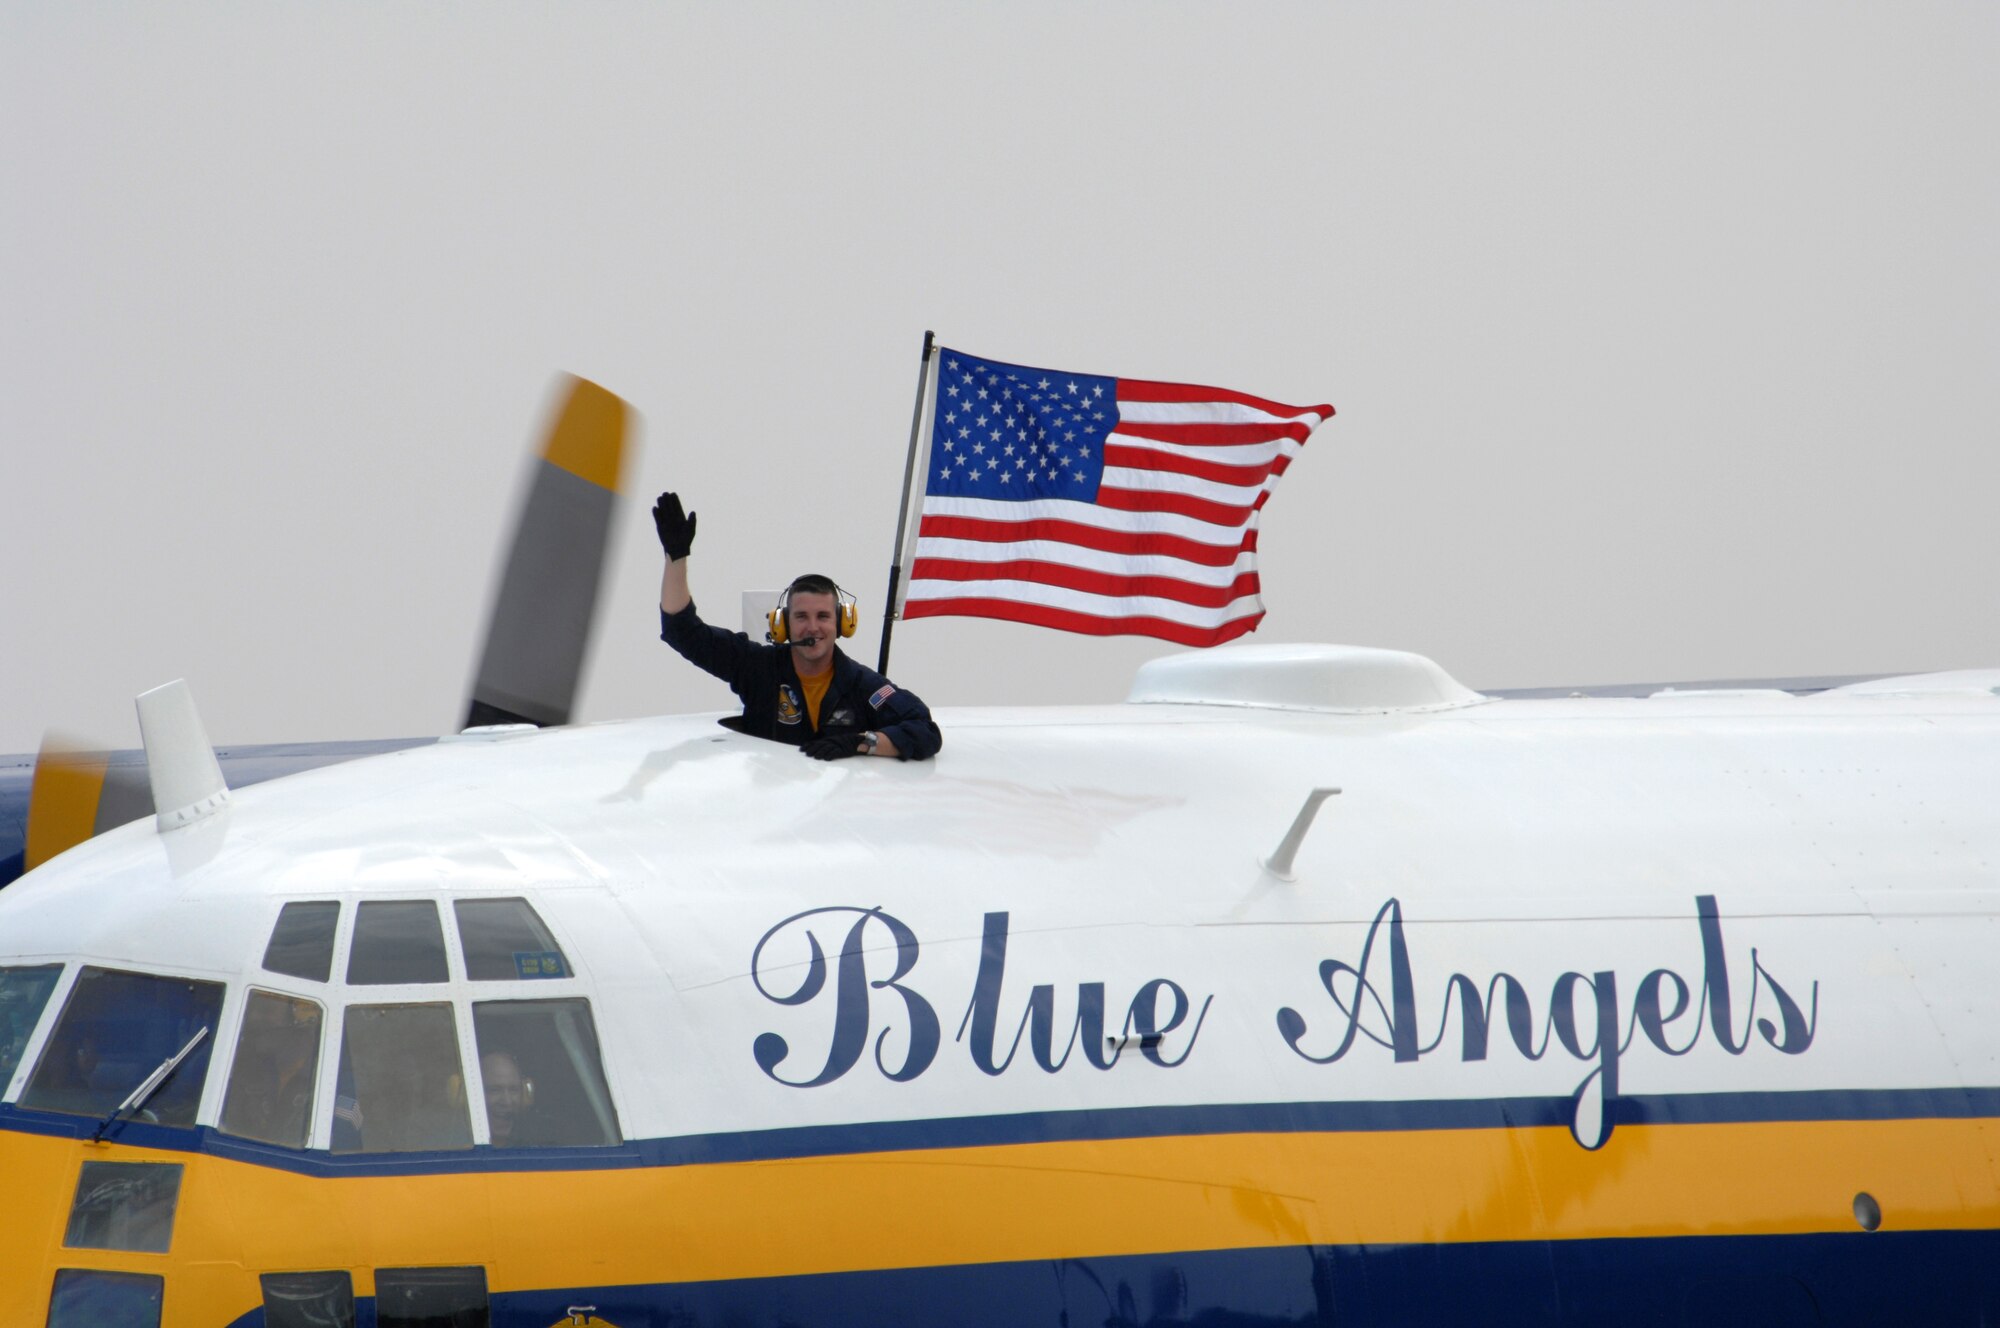 A member of the Blue Angels "Fat Albert" team carries an american flag and waves to the crowd at the Wings Over Wayne Airshow here May 12. The Wings Over Wayne Airshow 2007 is the first apperance of the Blue Angels since the accident that occurred April 21.(U.S. Air Force photo by Airman 1st Class Greg Biondo)(released)